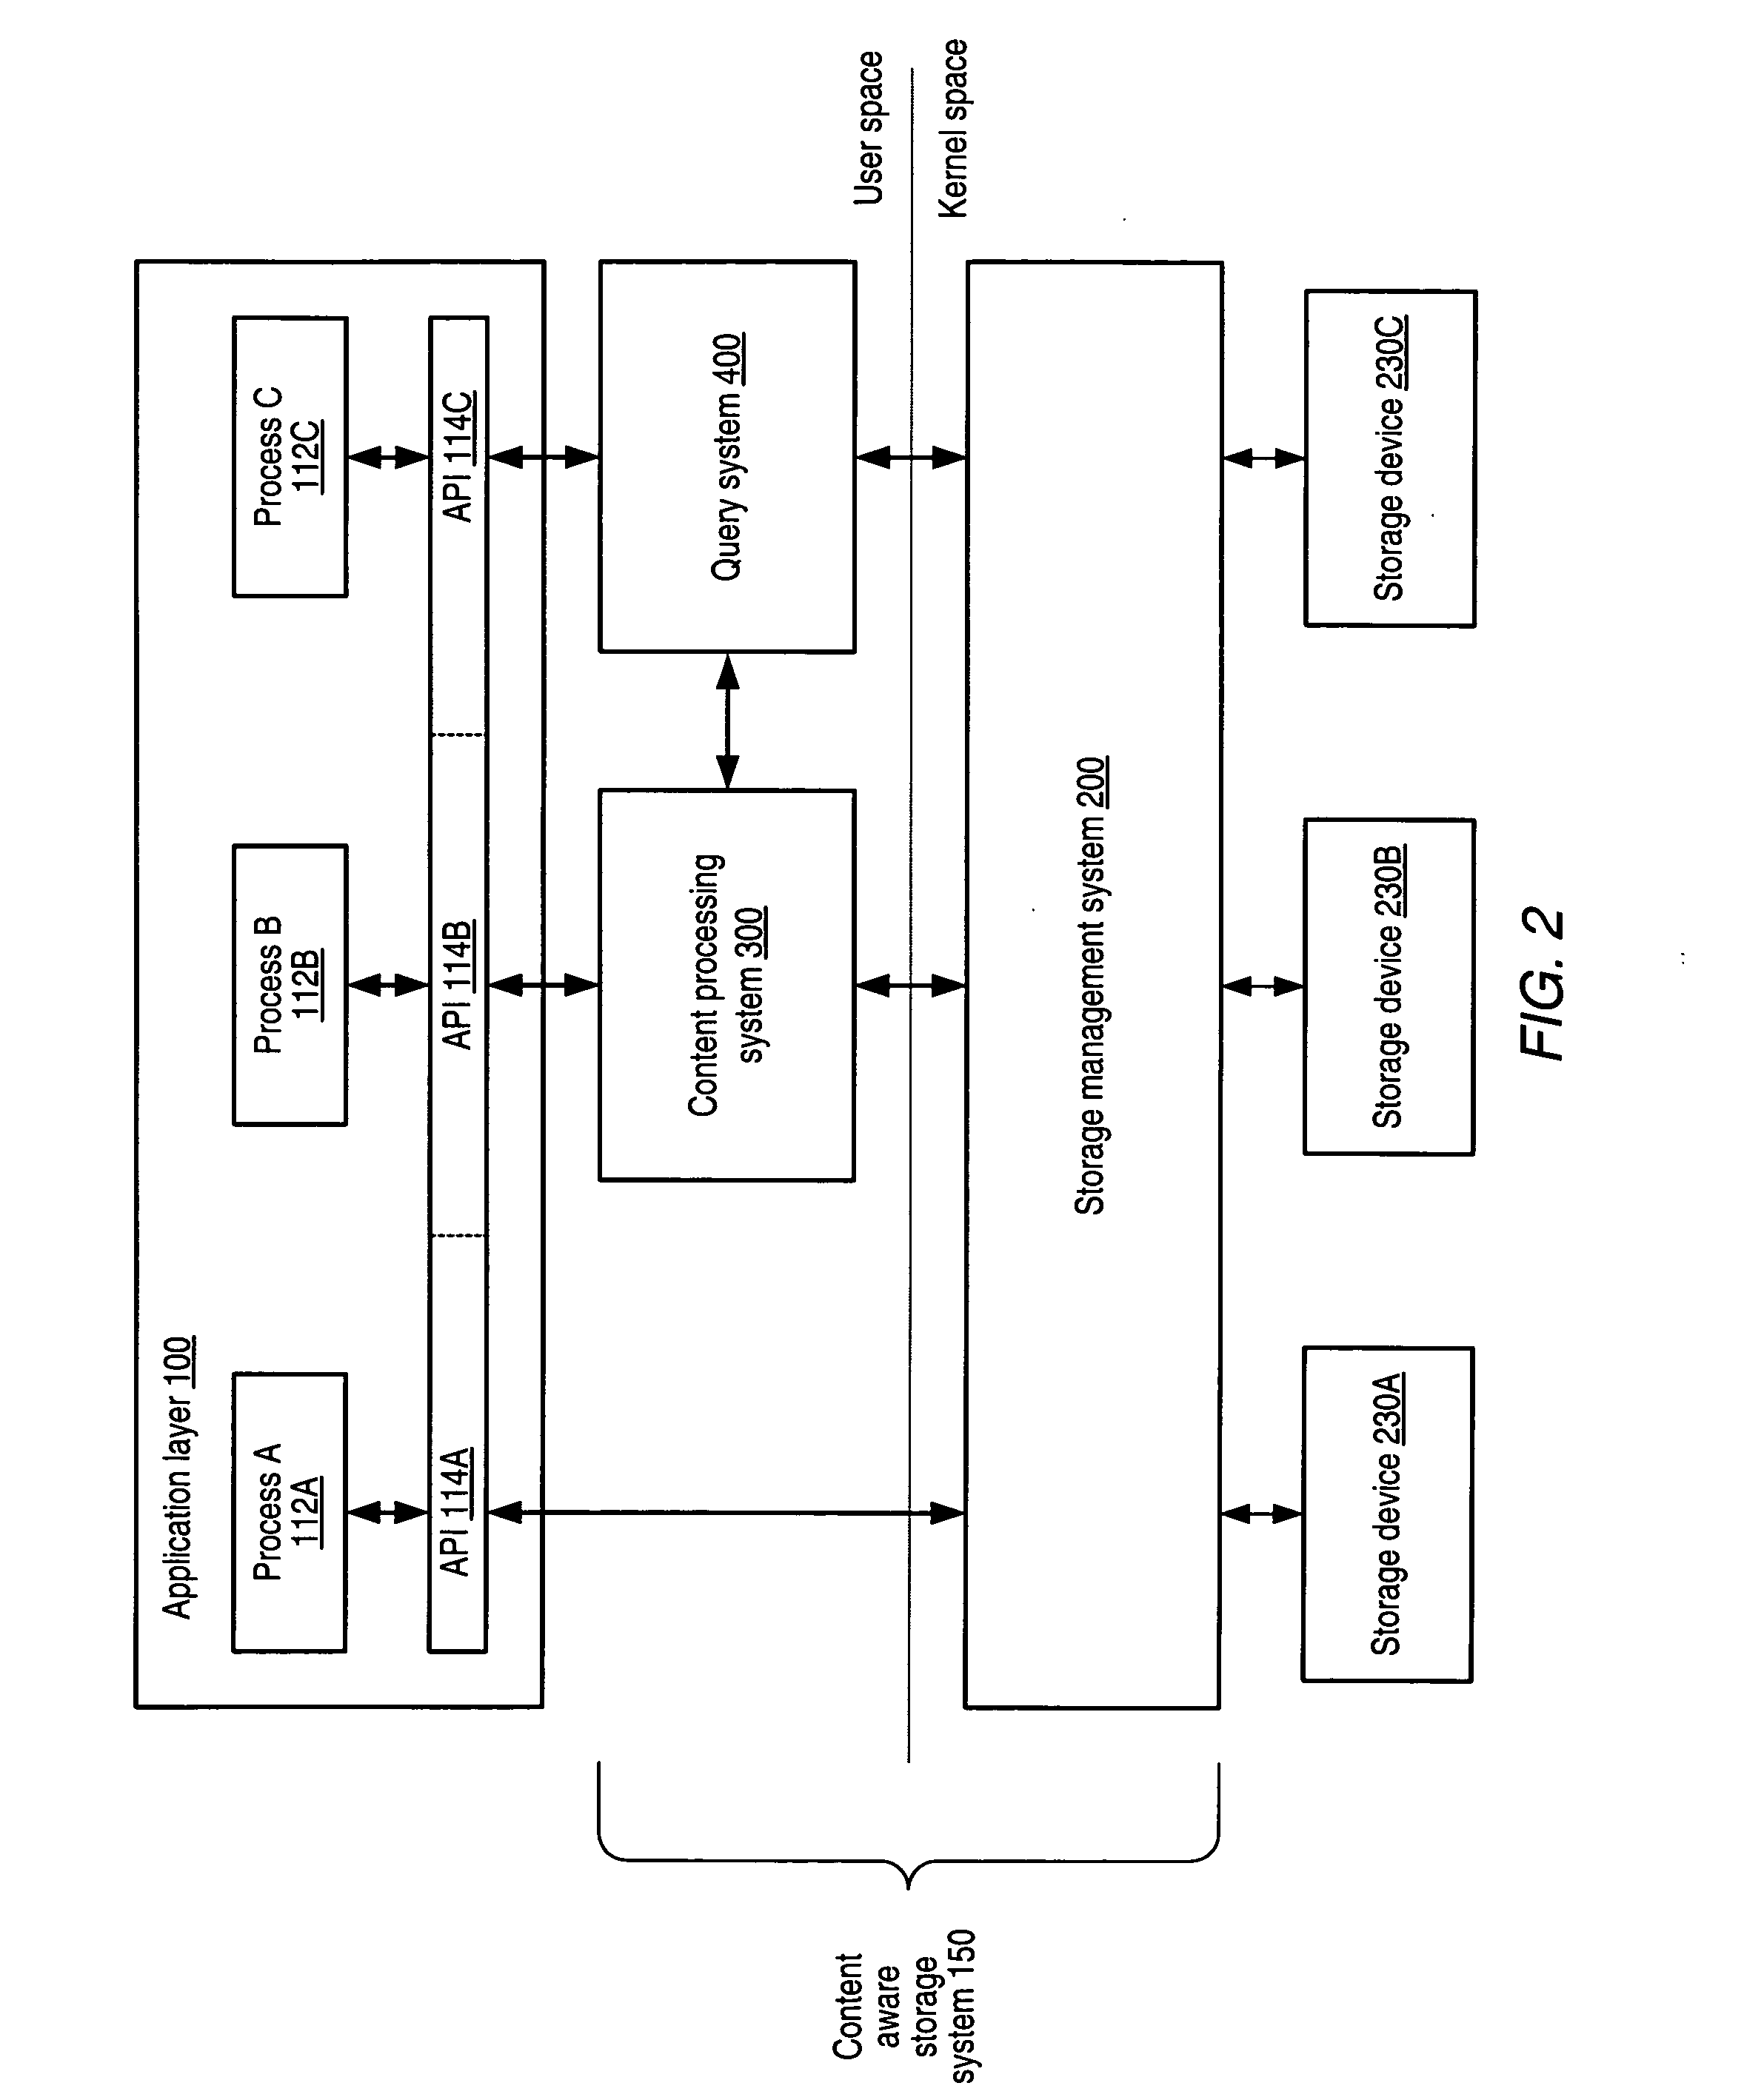 System and method for generating extensible file system metadata